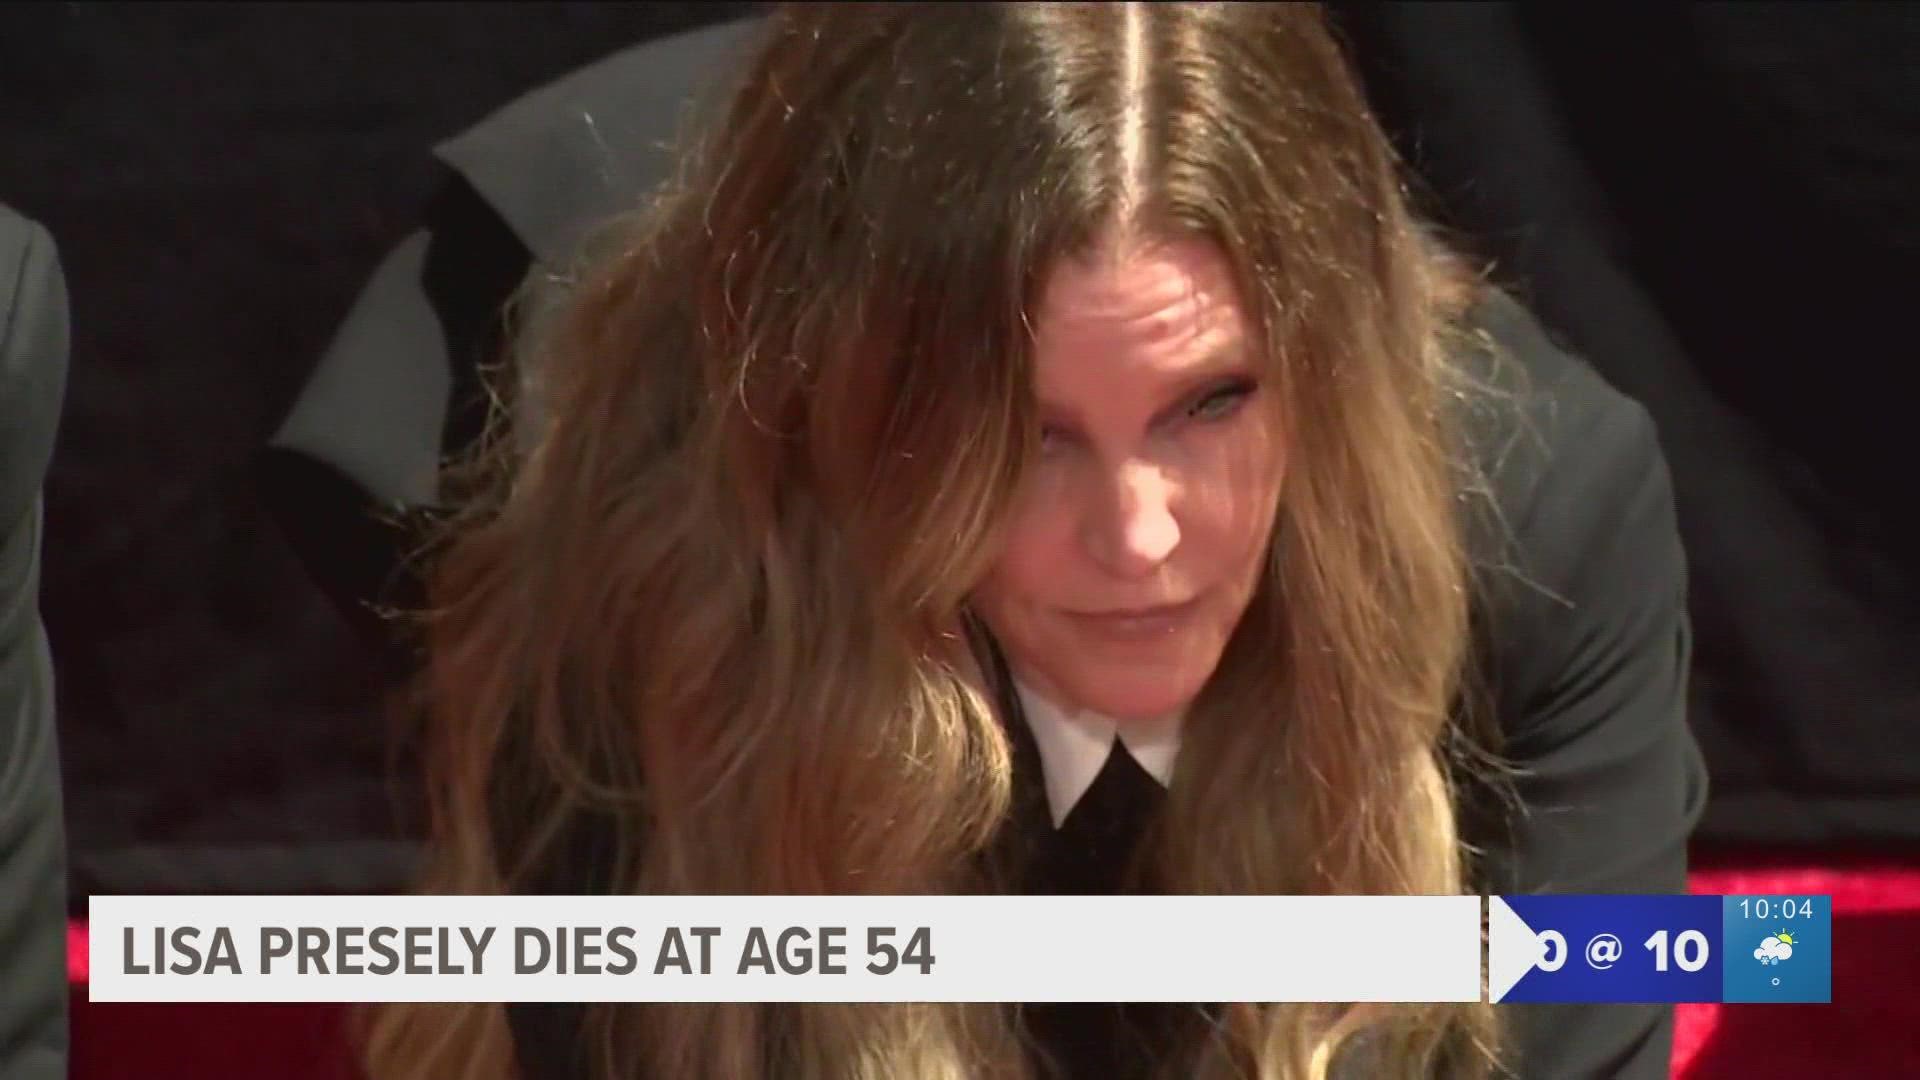 The 54-year-old singer and daughter of Elvis Presley was rushed to the hospital earlier in the day.